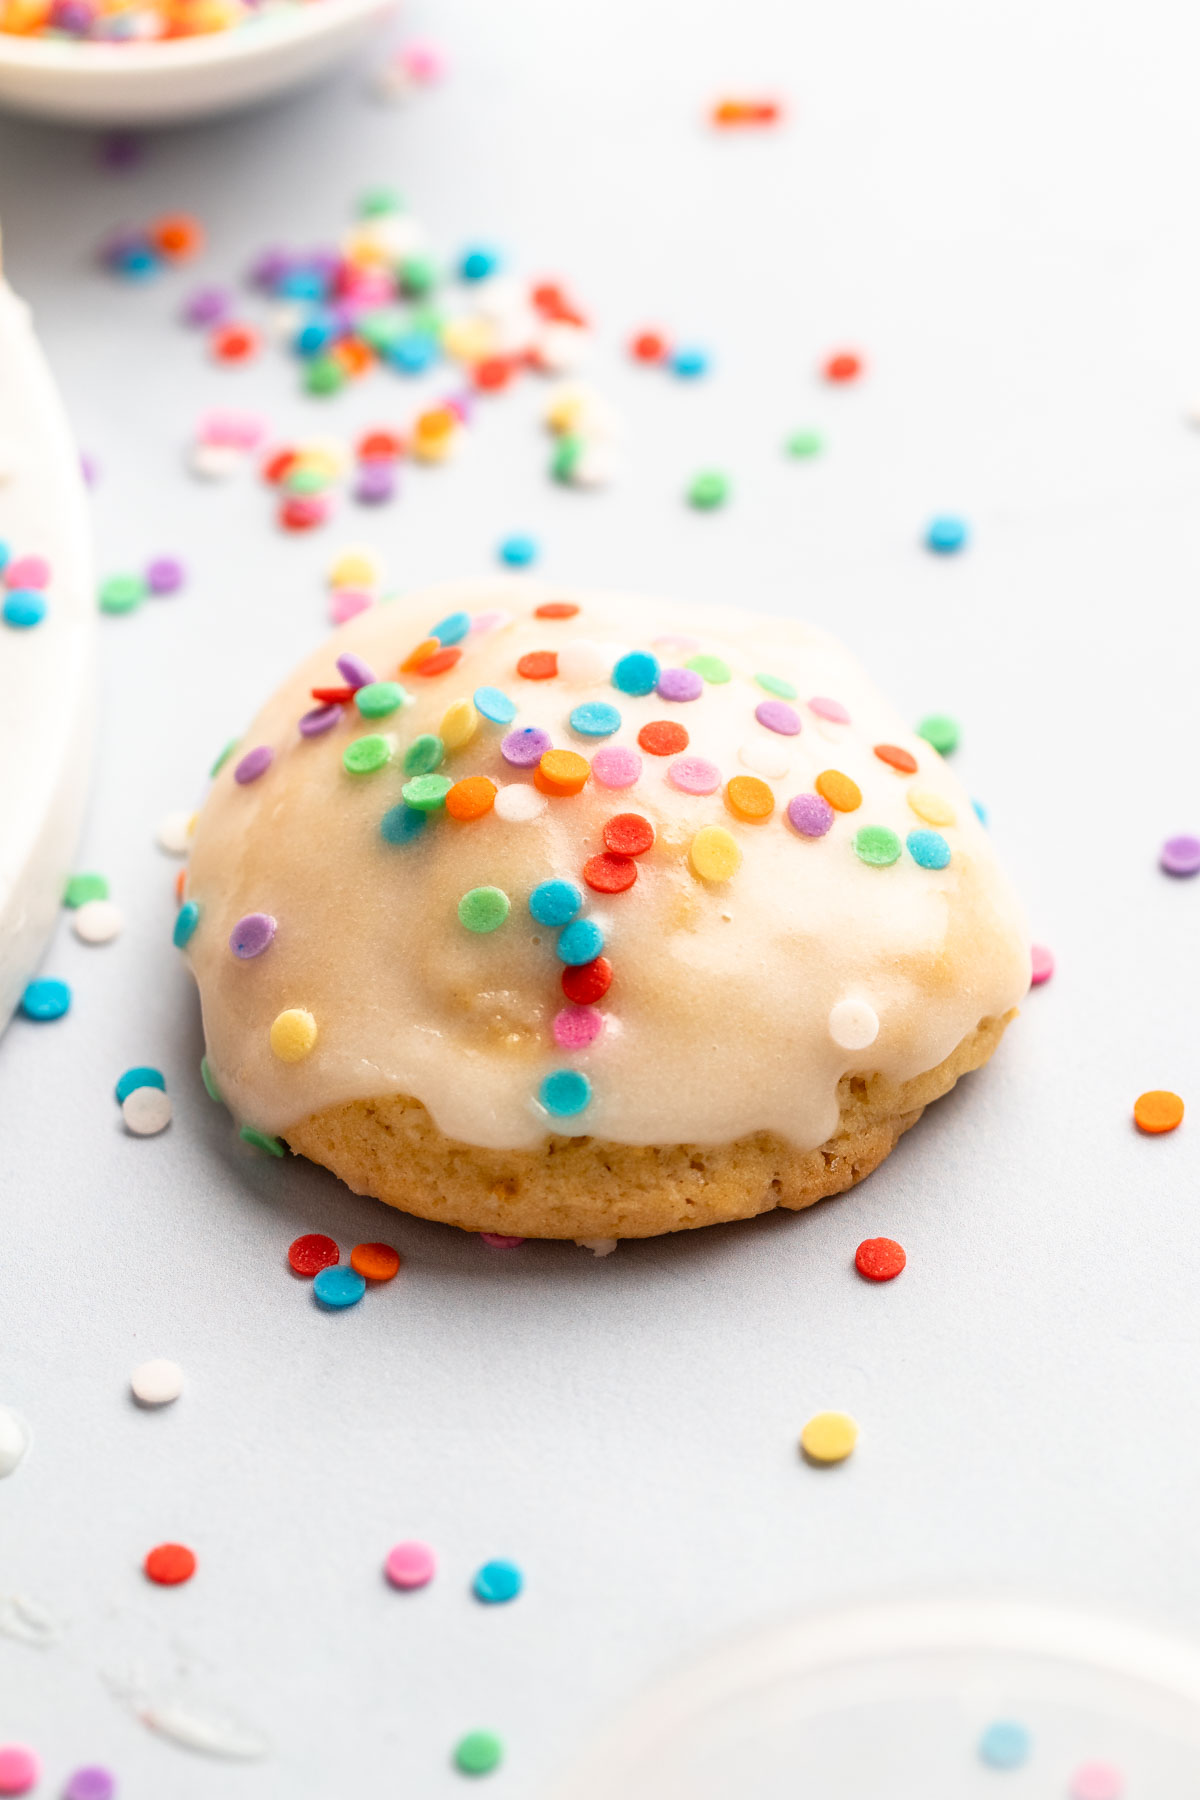 Single cookie with glaze and sprinkles.